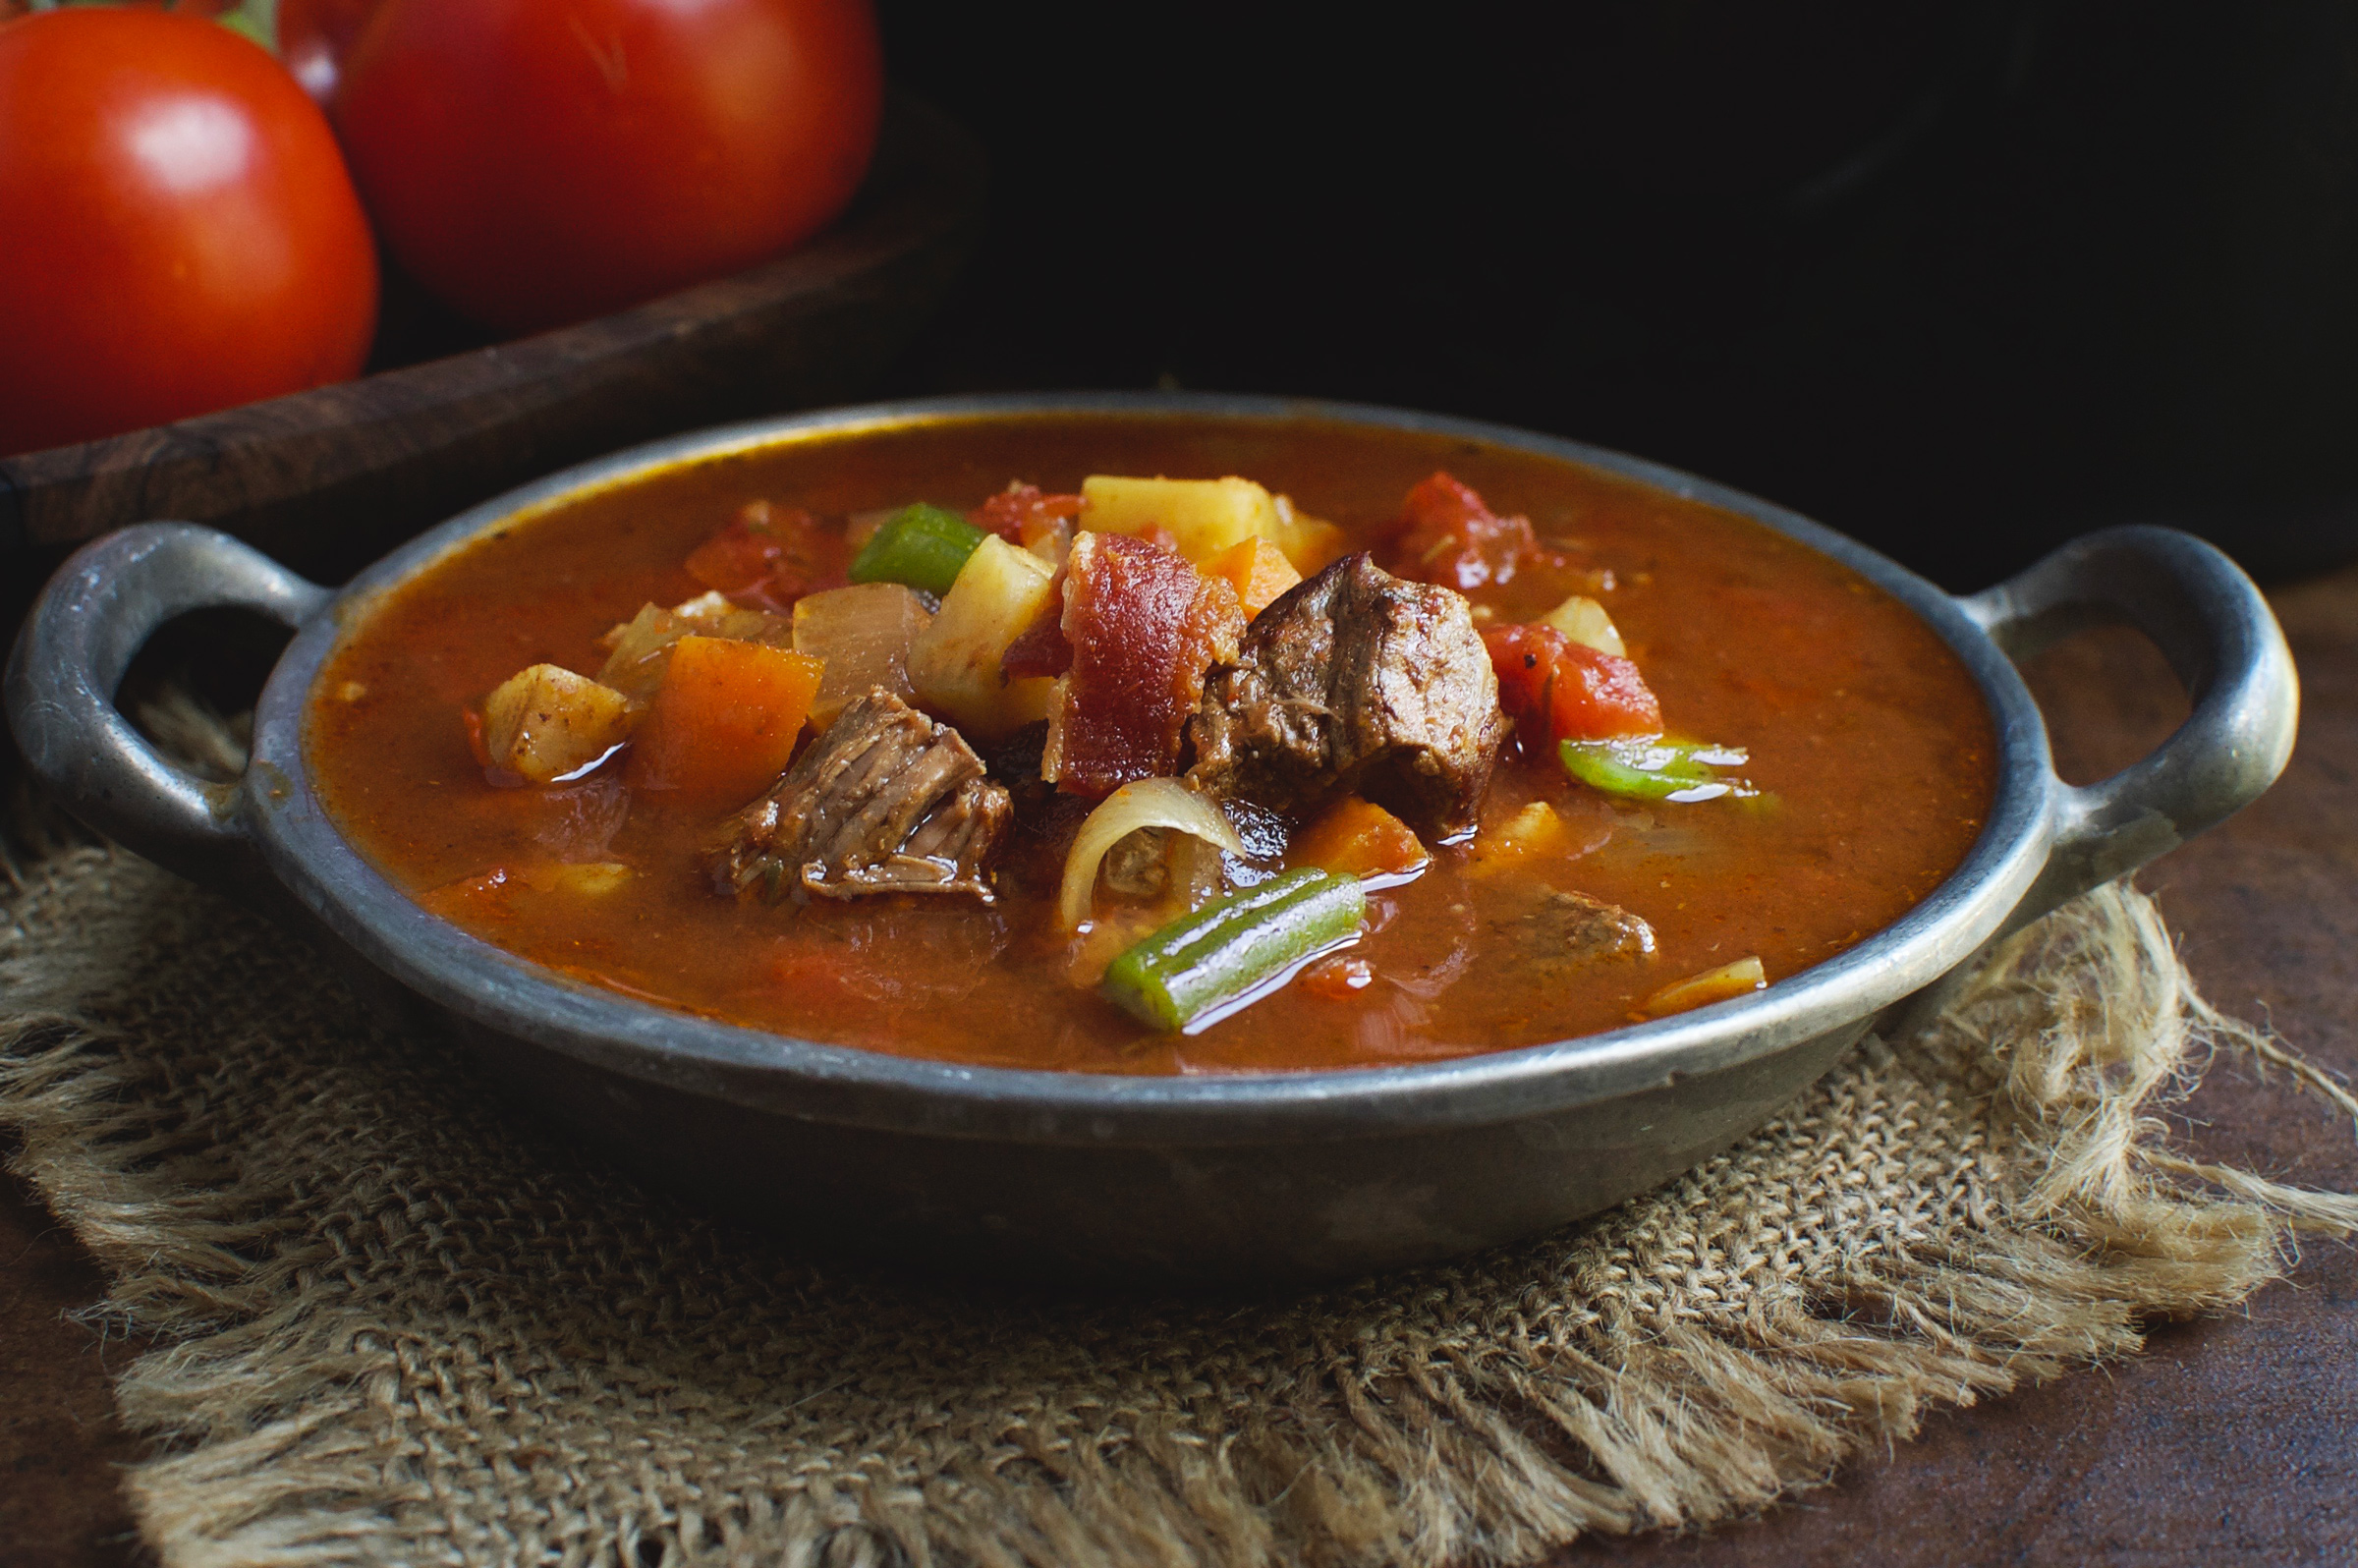 Low-Carb Slow-Cooker Vegetable Beef Soup Recipe - Simply So Healthy